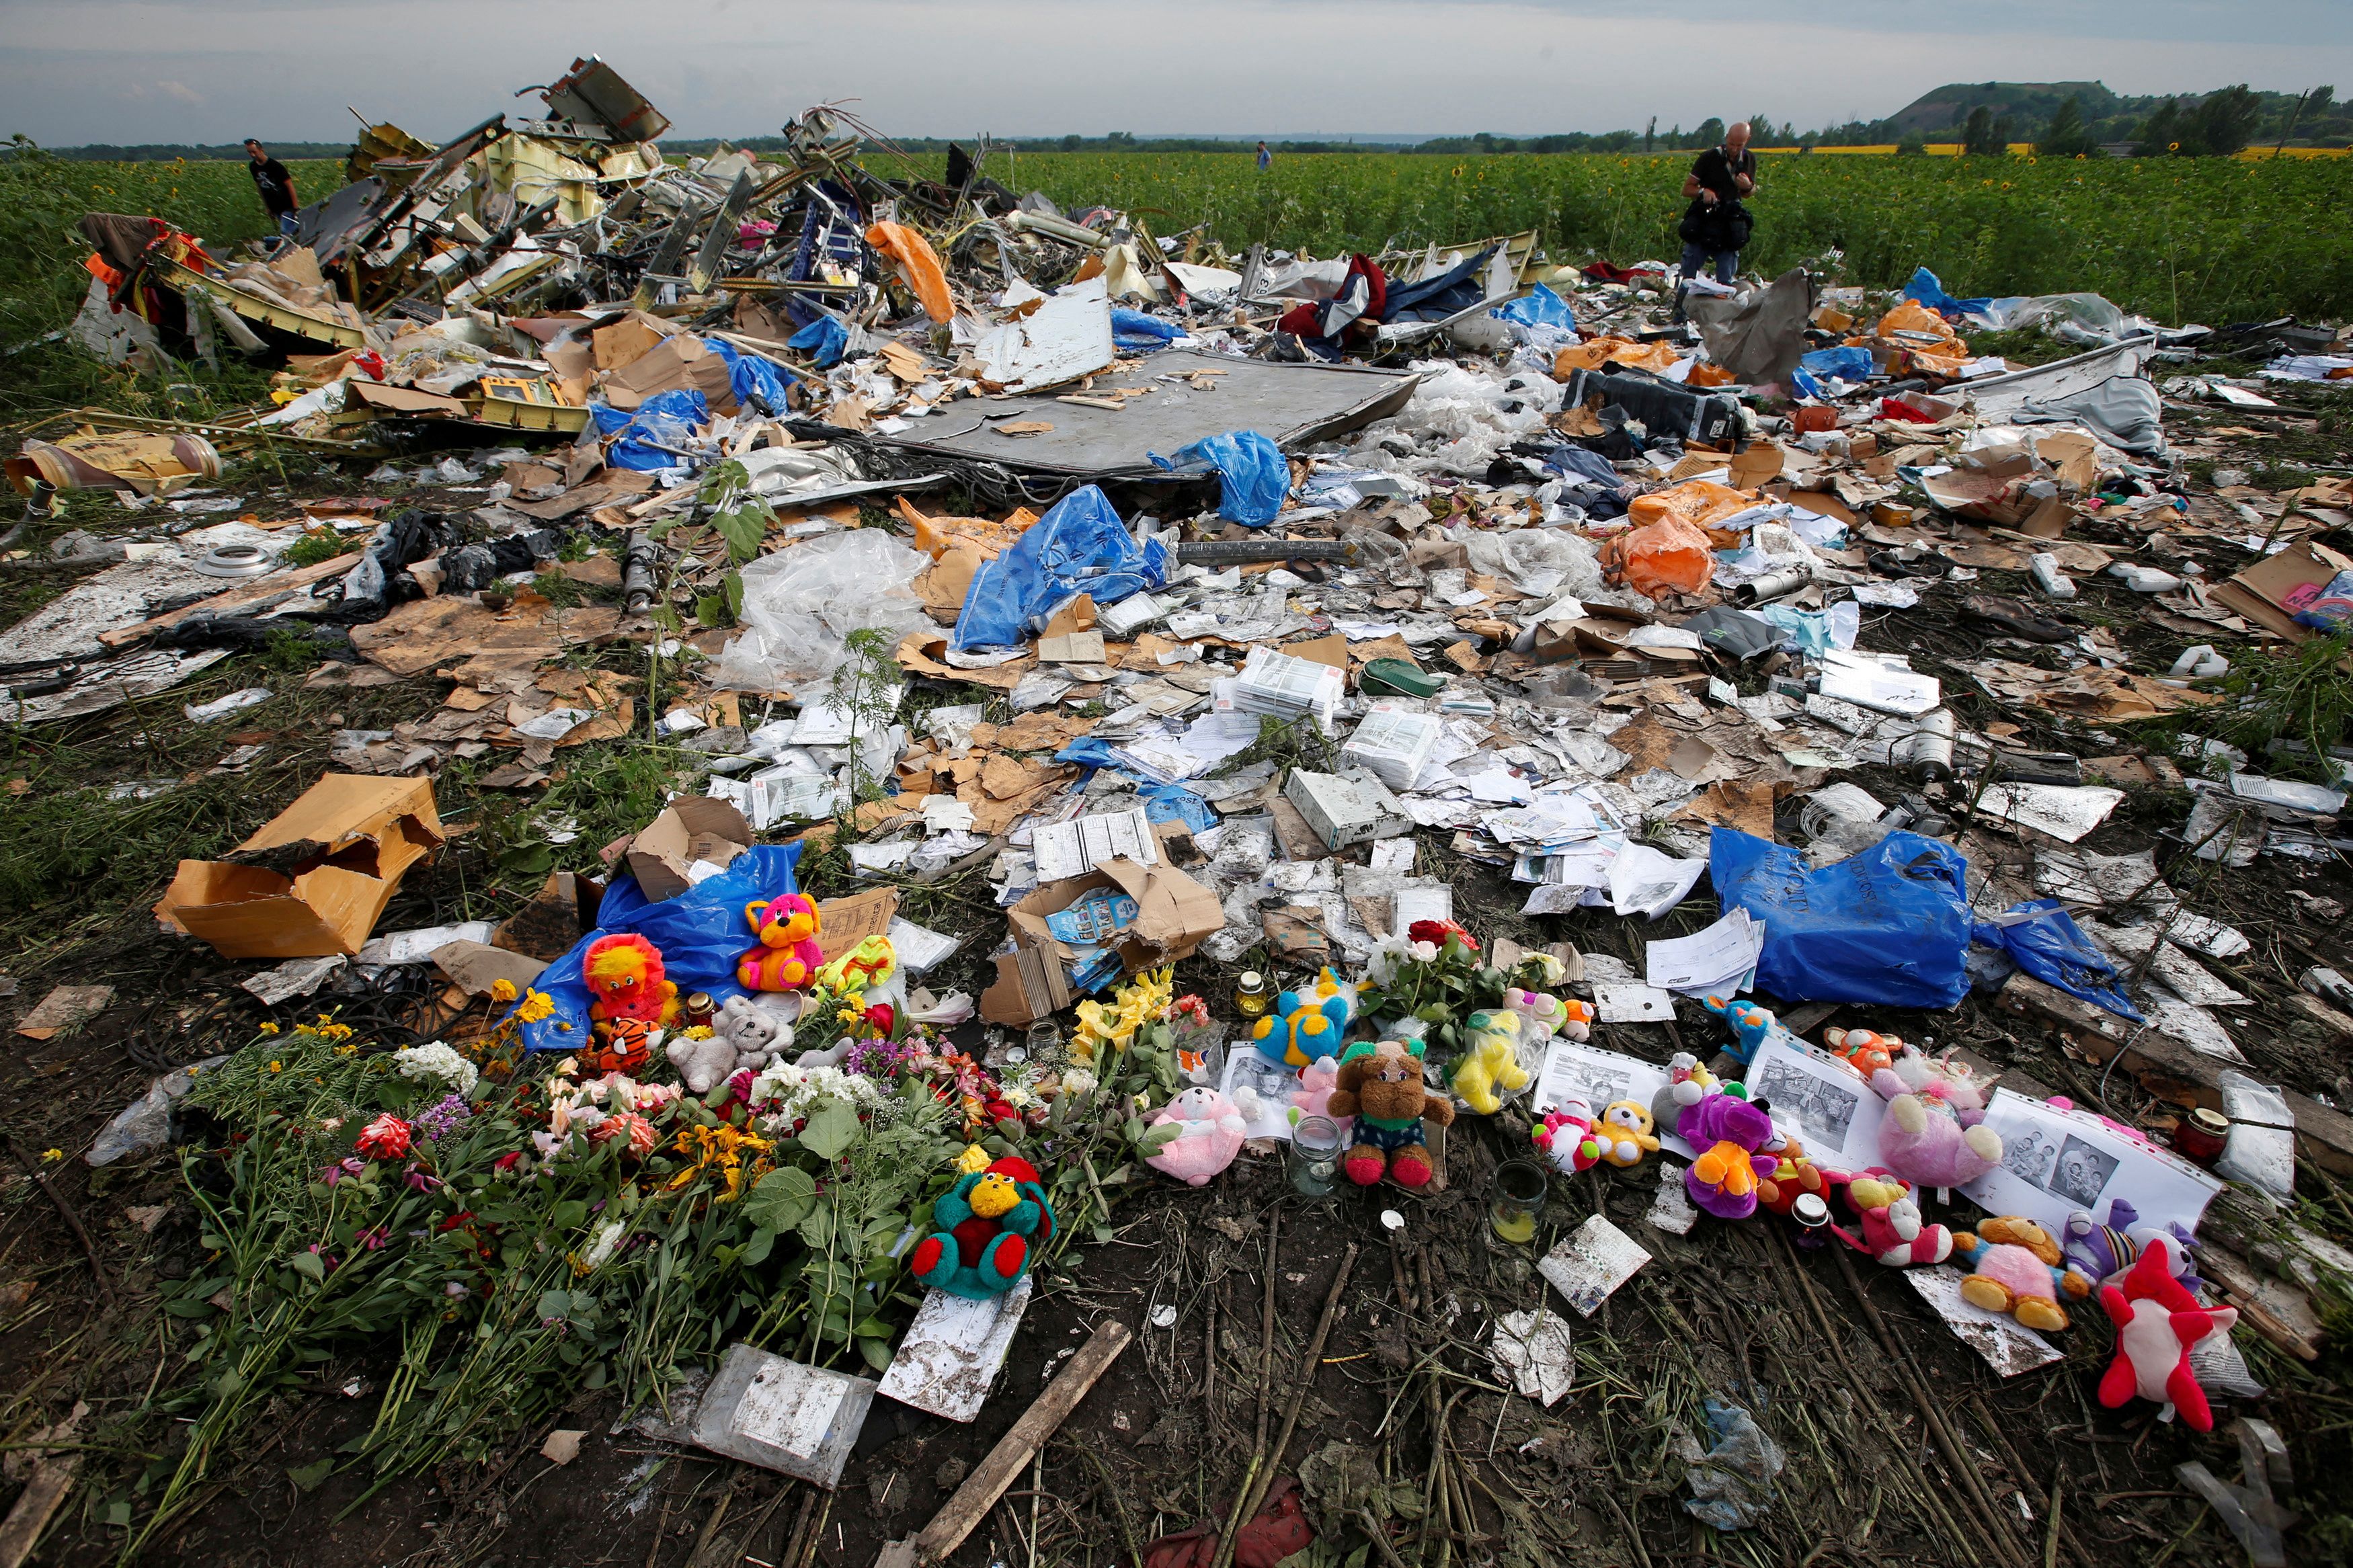 Flowers and mementos left by local residents at the crash site of Malaysia Airlines Flight MH17